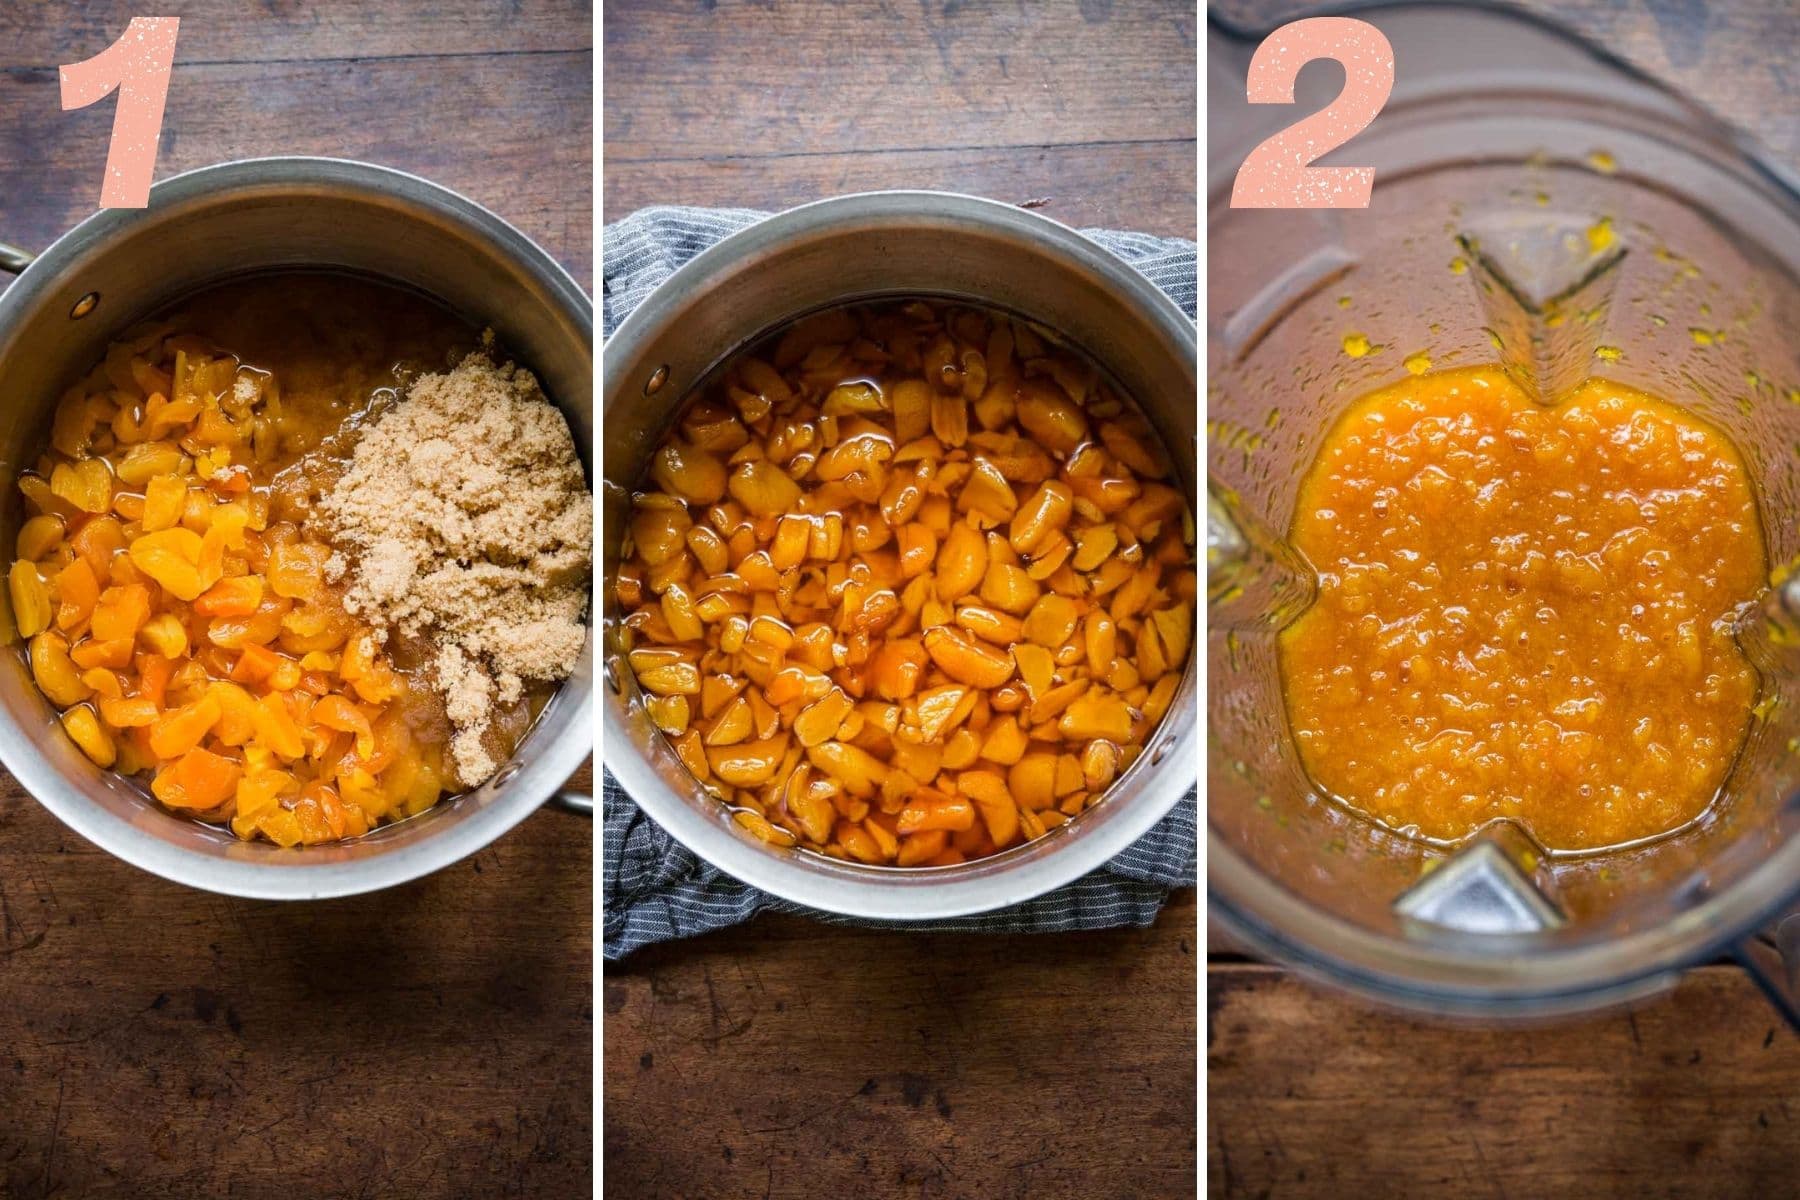 Overhead shots of apricot mixture being added to the pot and then blended up.